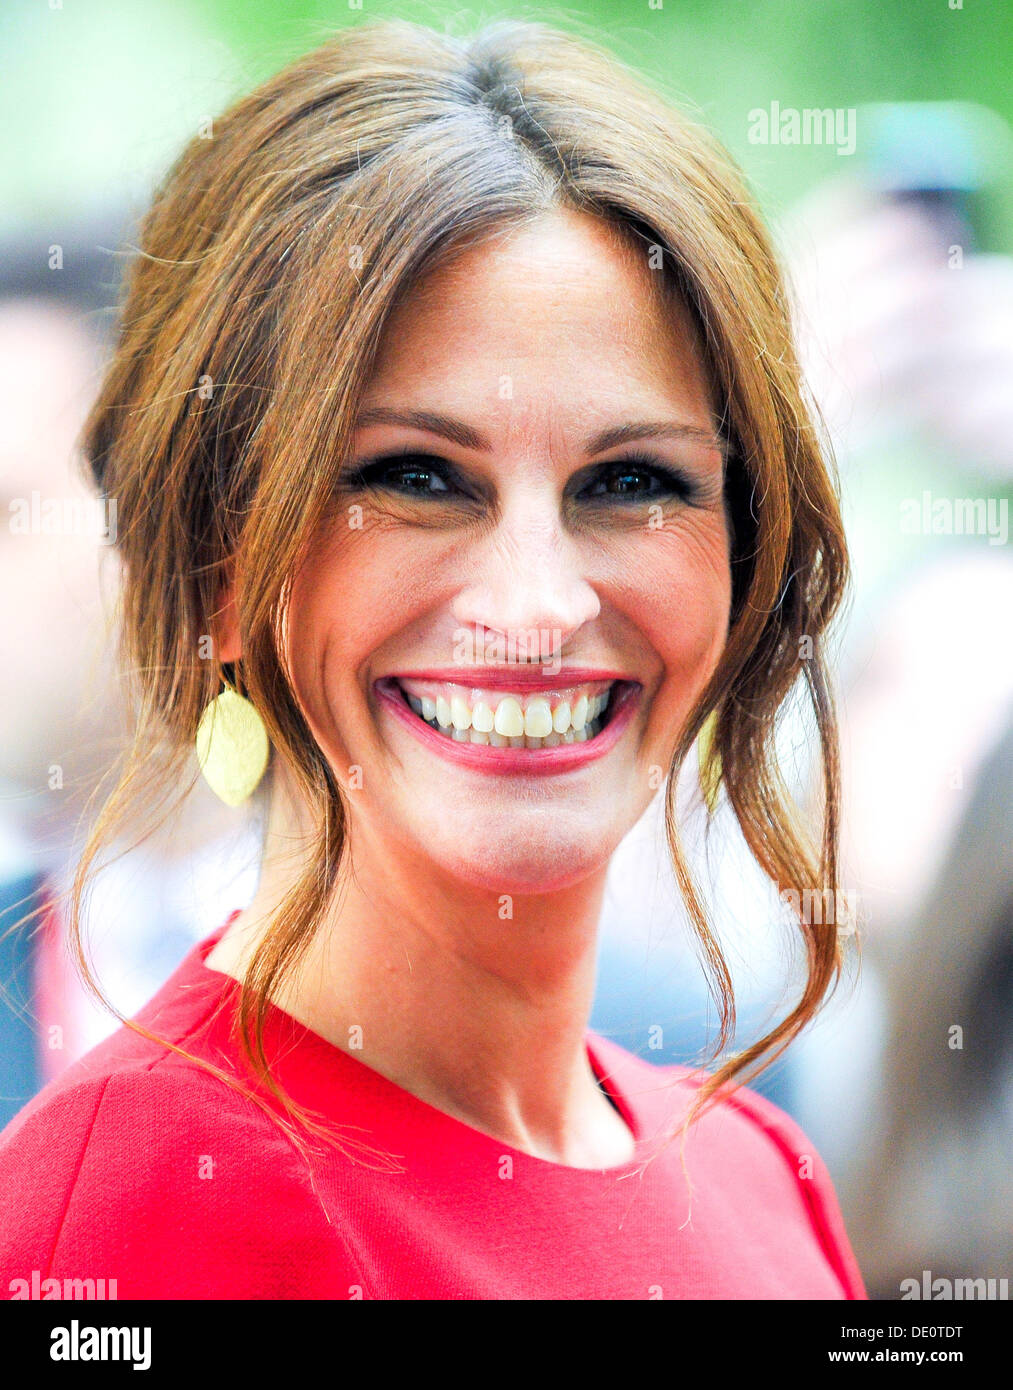 Toronto, Ontario, Canada. 9th Sep, 2013. Actress JULIA ROBERTS arrives at the 'August: Osage County' Premiere during the 2013 Toronto International Film Festival at TIFF Bell Lightbox on September 9, 2013 in Toronto, Canada. Credit:  Igor Vidyashev/ZUMAPRESS.com/Alamy Live News Stock Photo